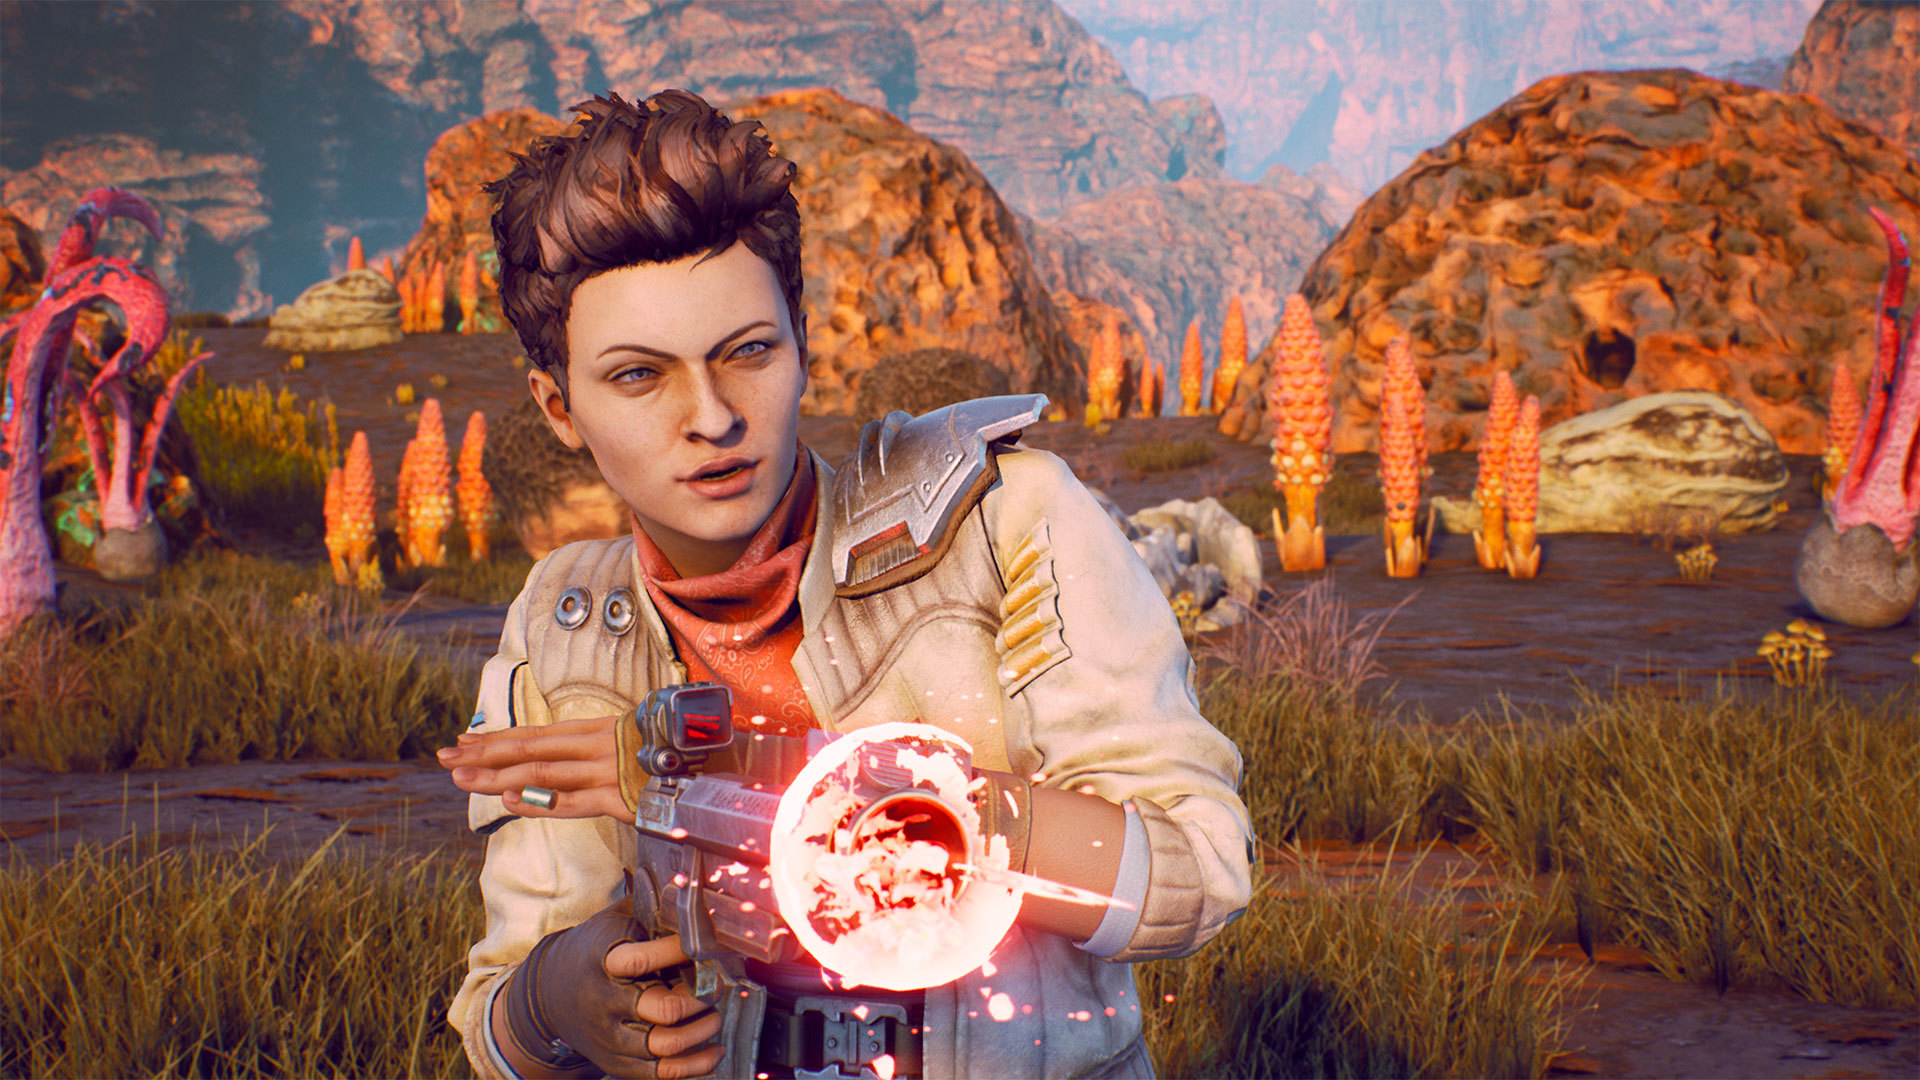 The Outer Worlds beginner's guide - Polygon